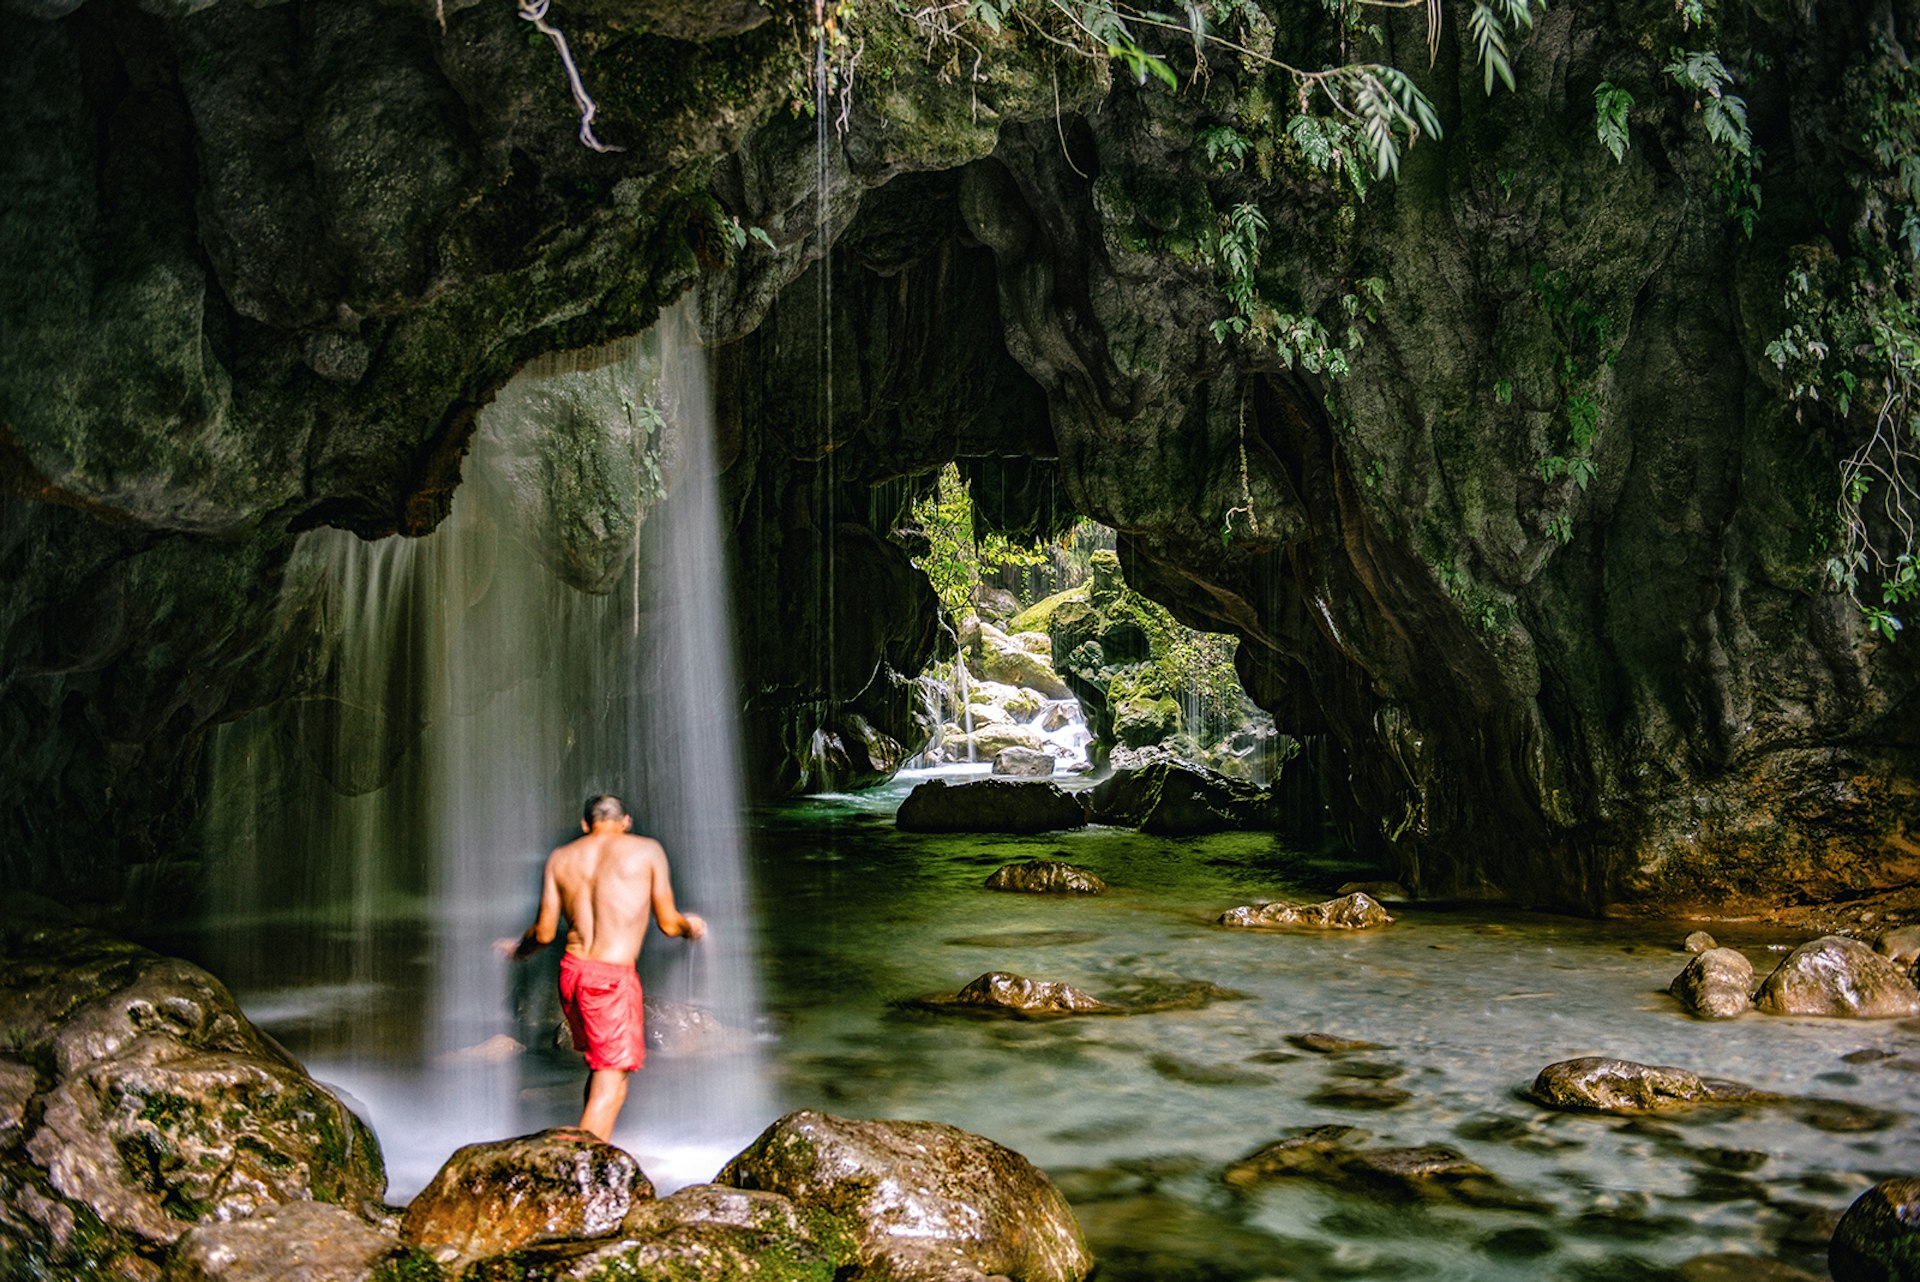 A man in red shorts stands under a waterfall within a cave tunnel in the Sierra Gorda, Mexico